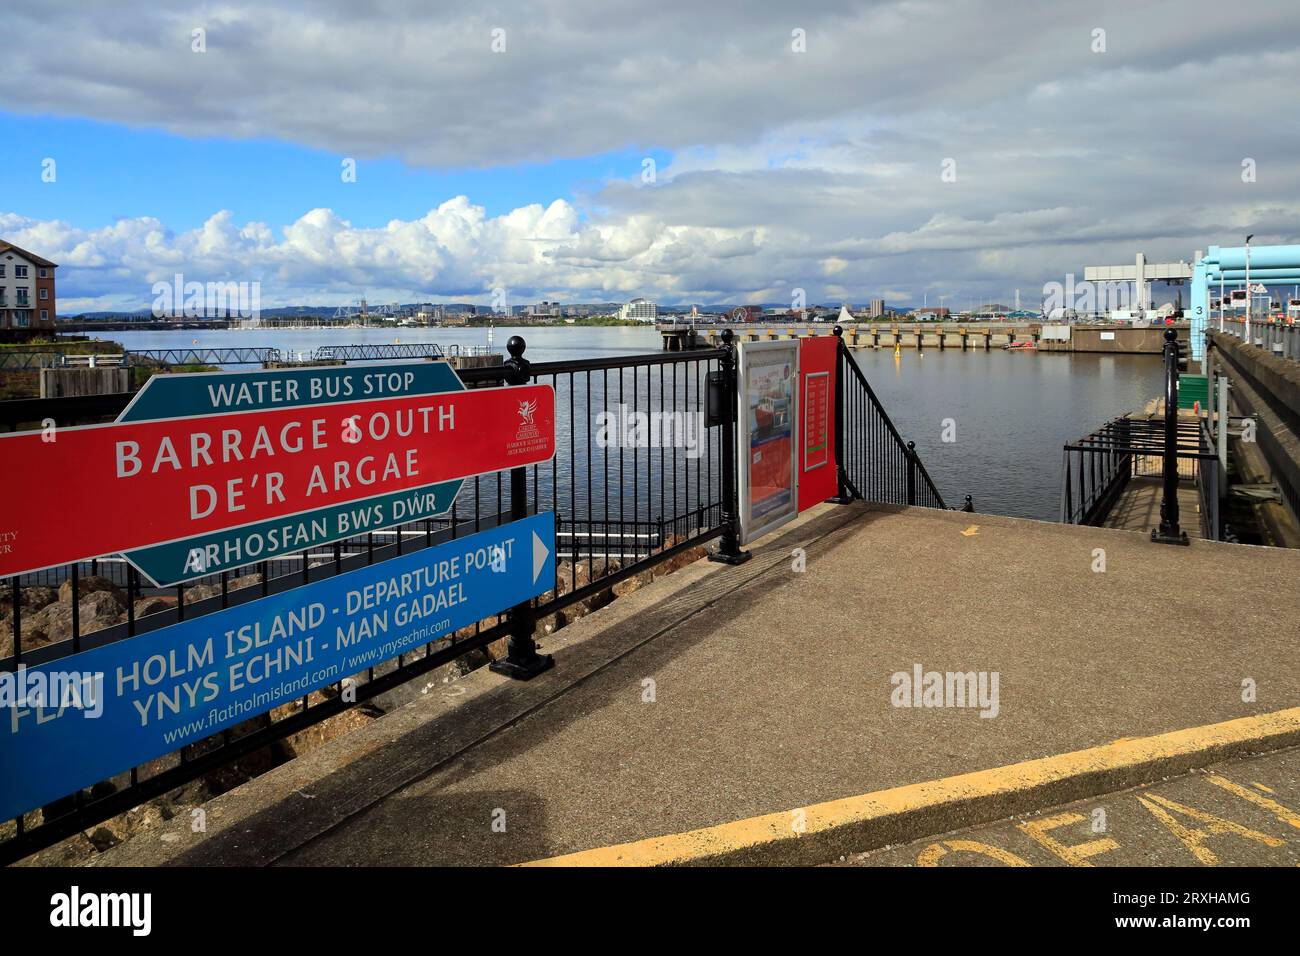 Boat departure point in Cardiff Bay for Flat Holm island and water bus stop for Cardiff Bay. Taken September 2023 Stock Photo